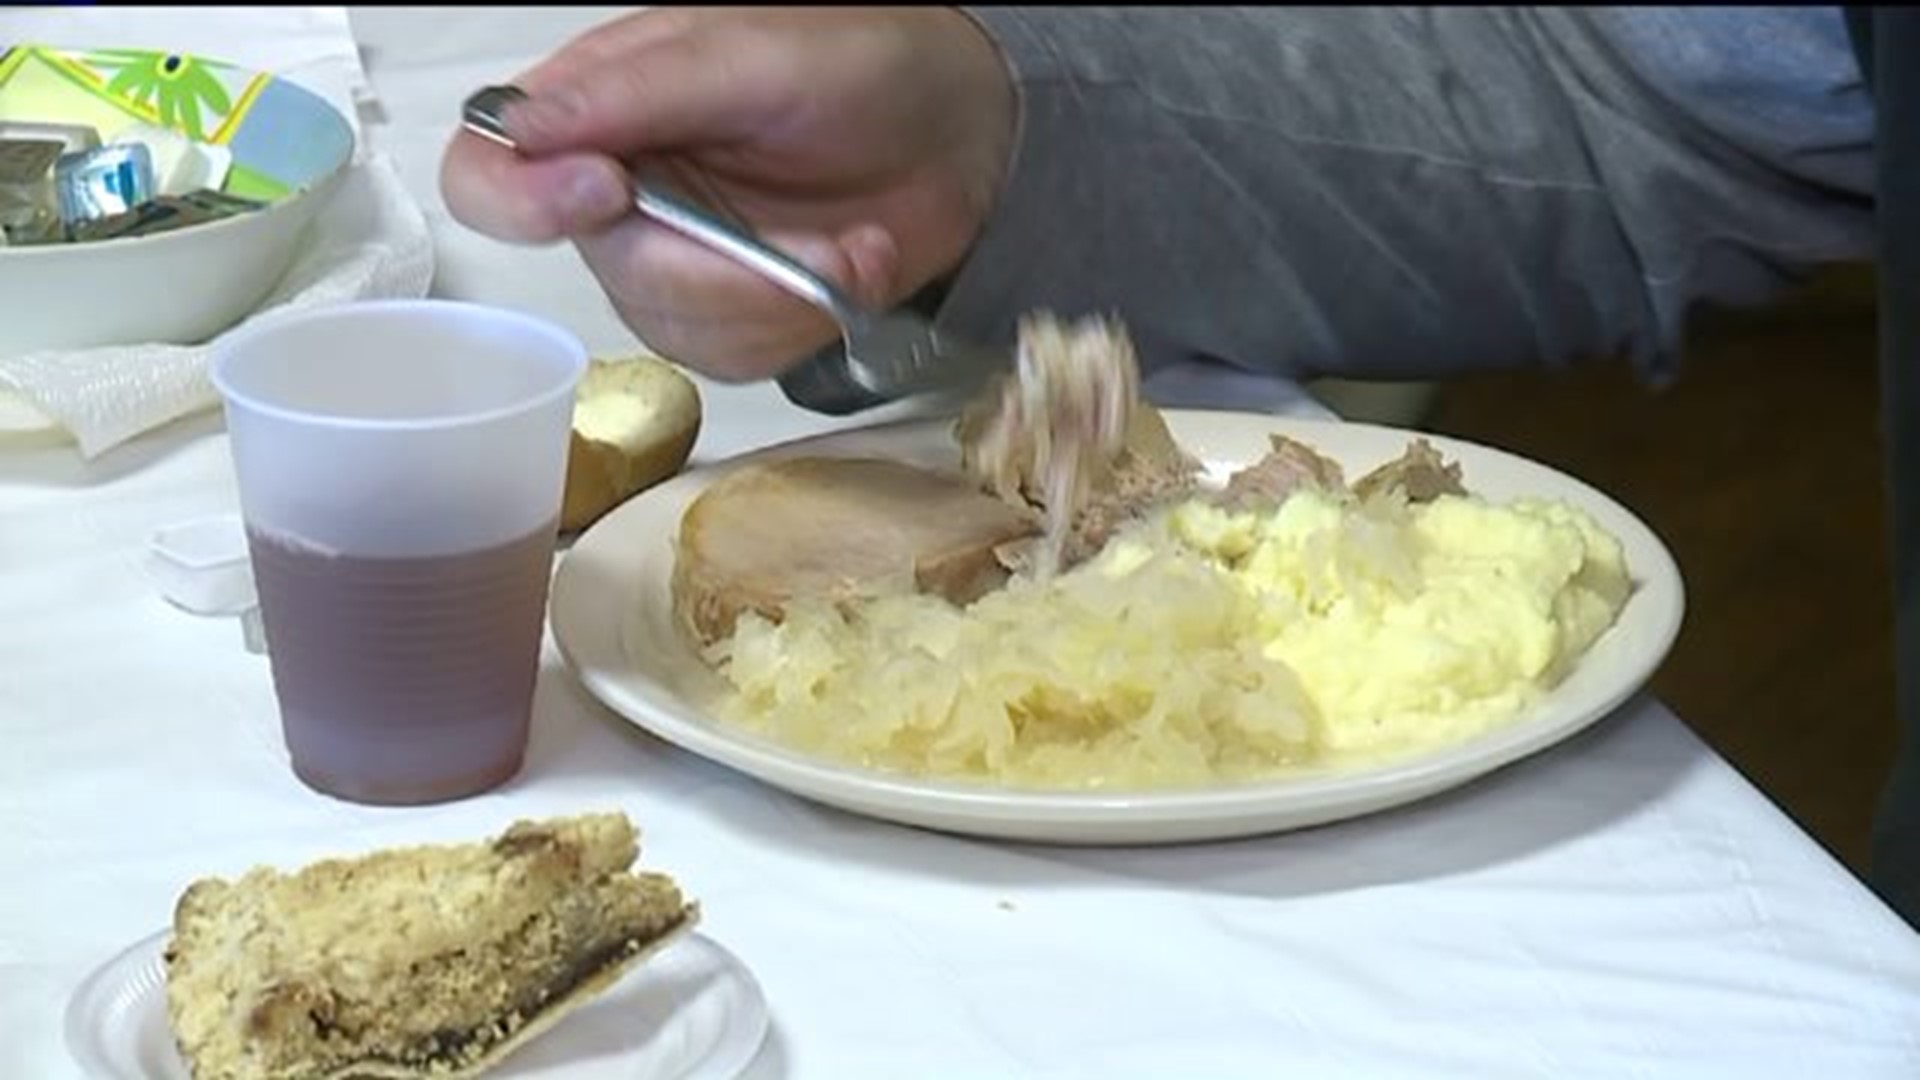 Fundraising Dinner an Election Day Tradition in Schuylkill County